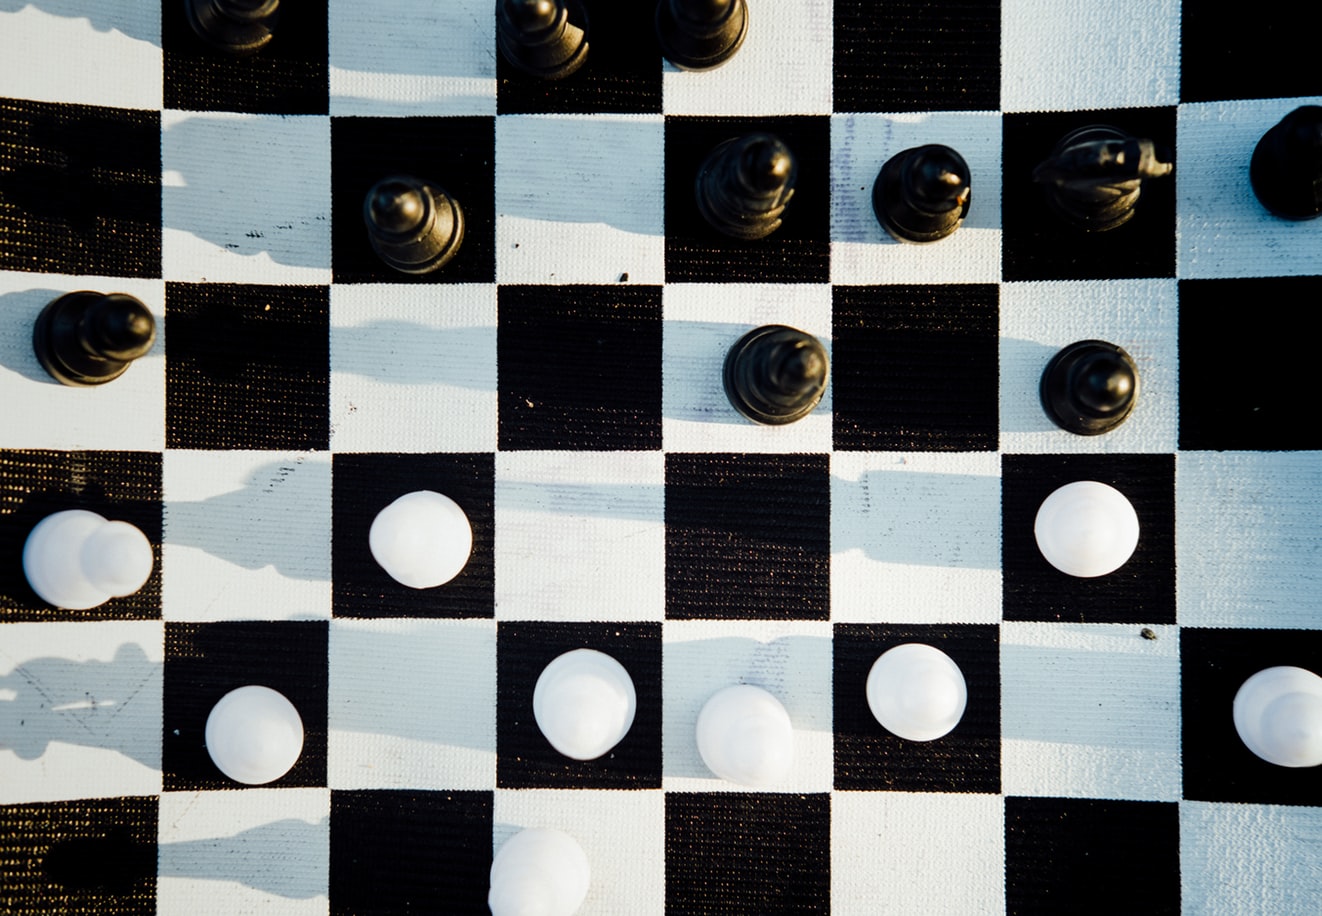 Chess image as a metaphor for market competition and customer research